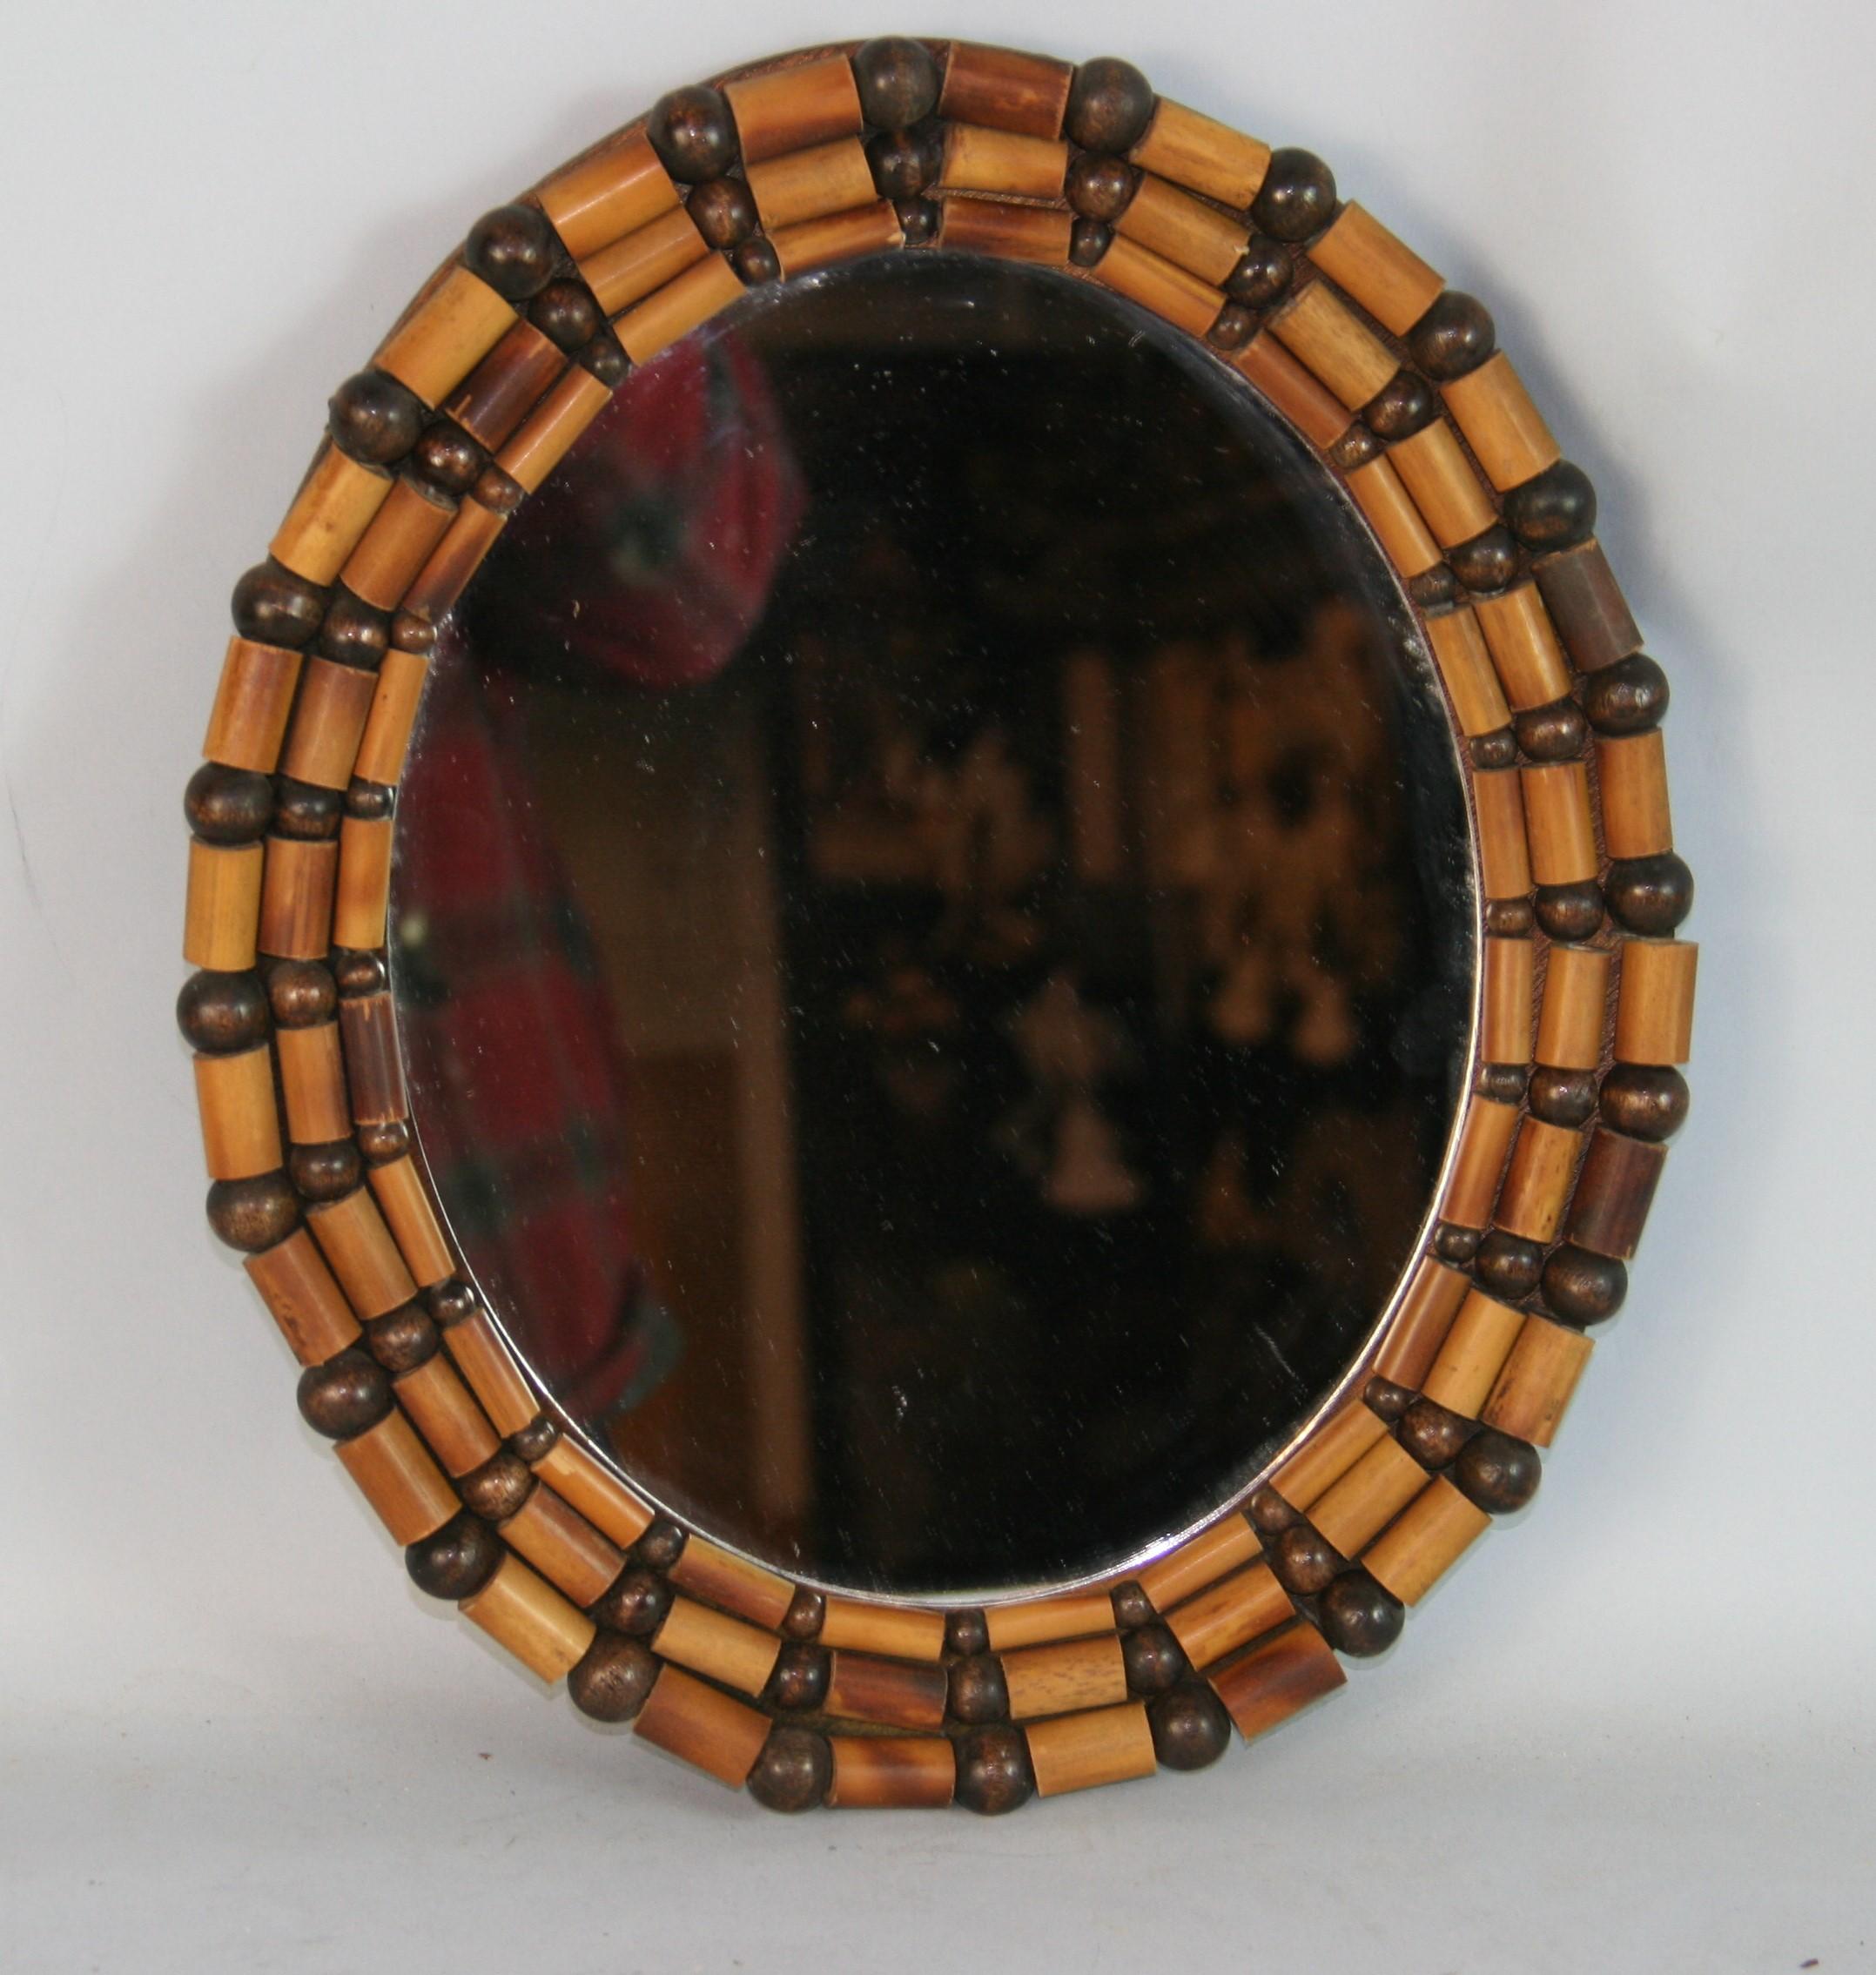 Wood Beads and Balls Small Oval Mirror In Good Condition For Sale In Douglas Manor, NY